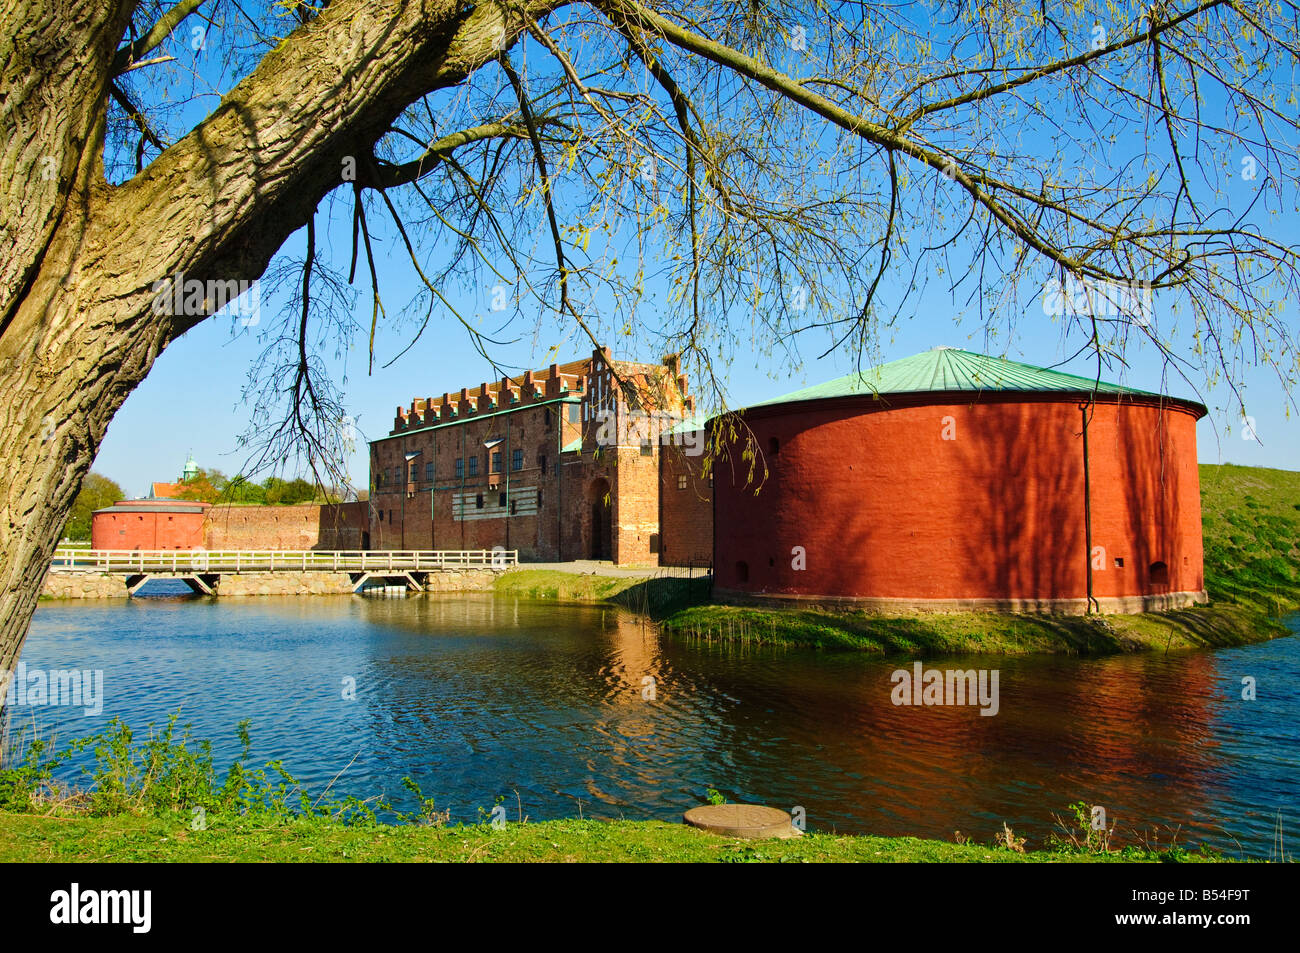 Malmöhus slott a 15th century moated fortress adjoining the Old Town of Malmö Sweden Stock Photo